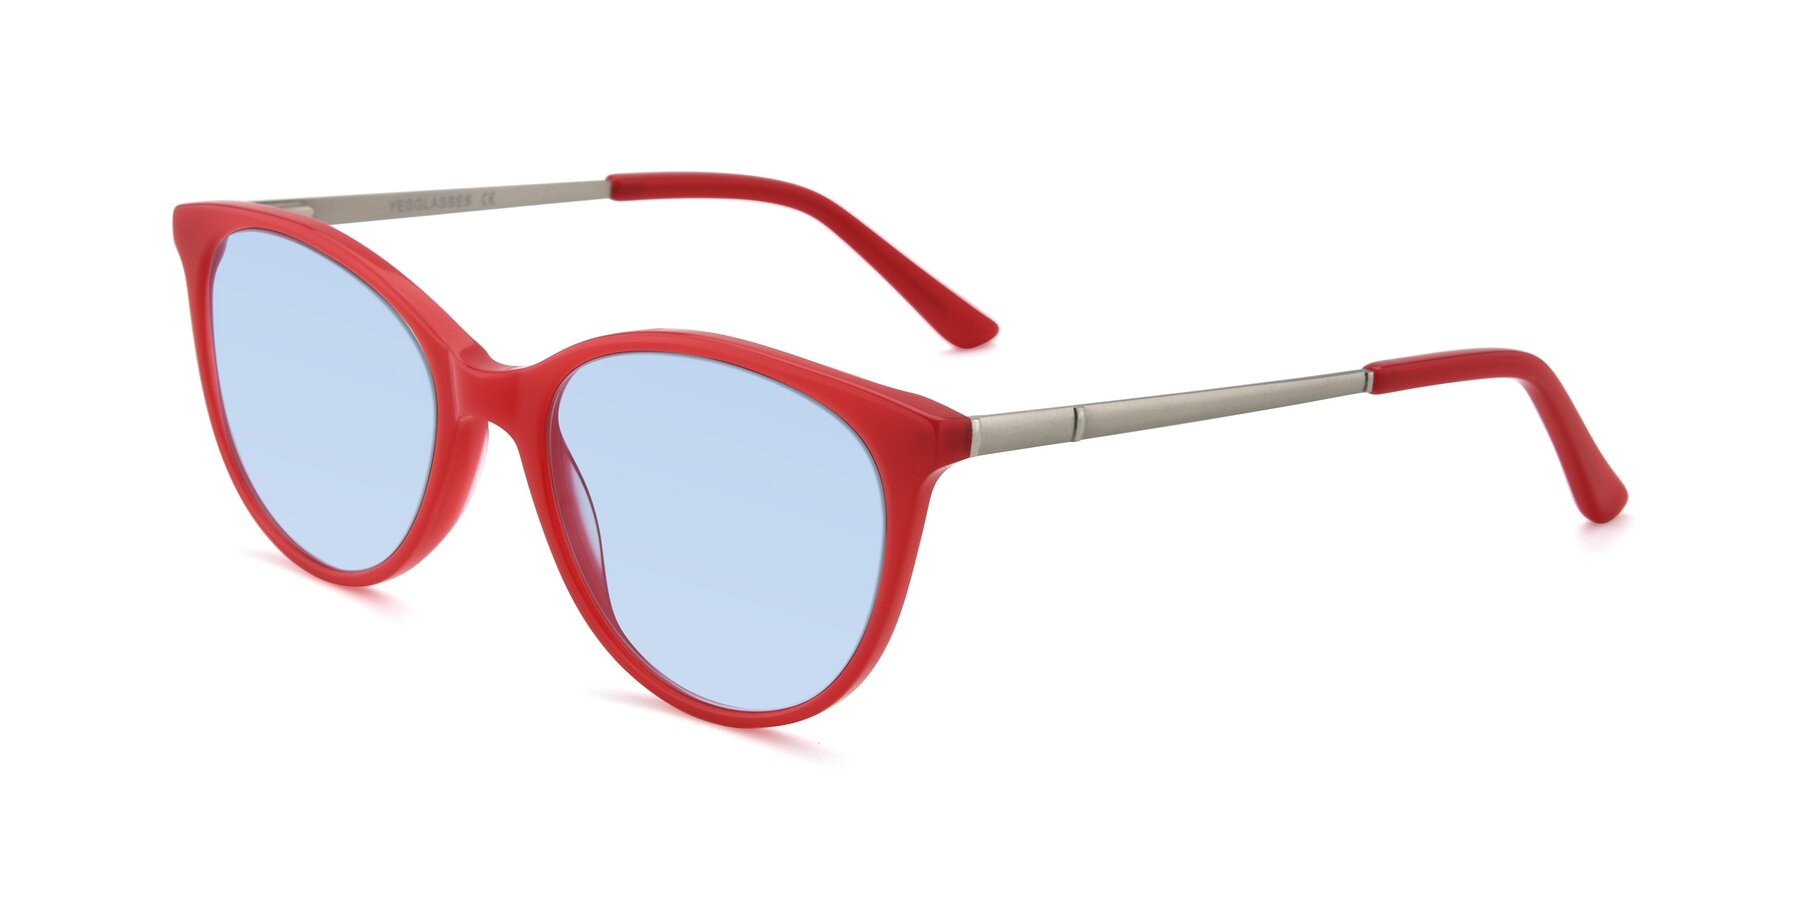 Angle of SR6062 in Rose with Light Blue Tinted Lenses